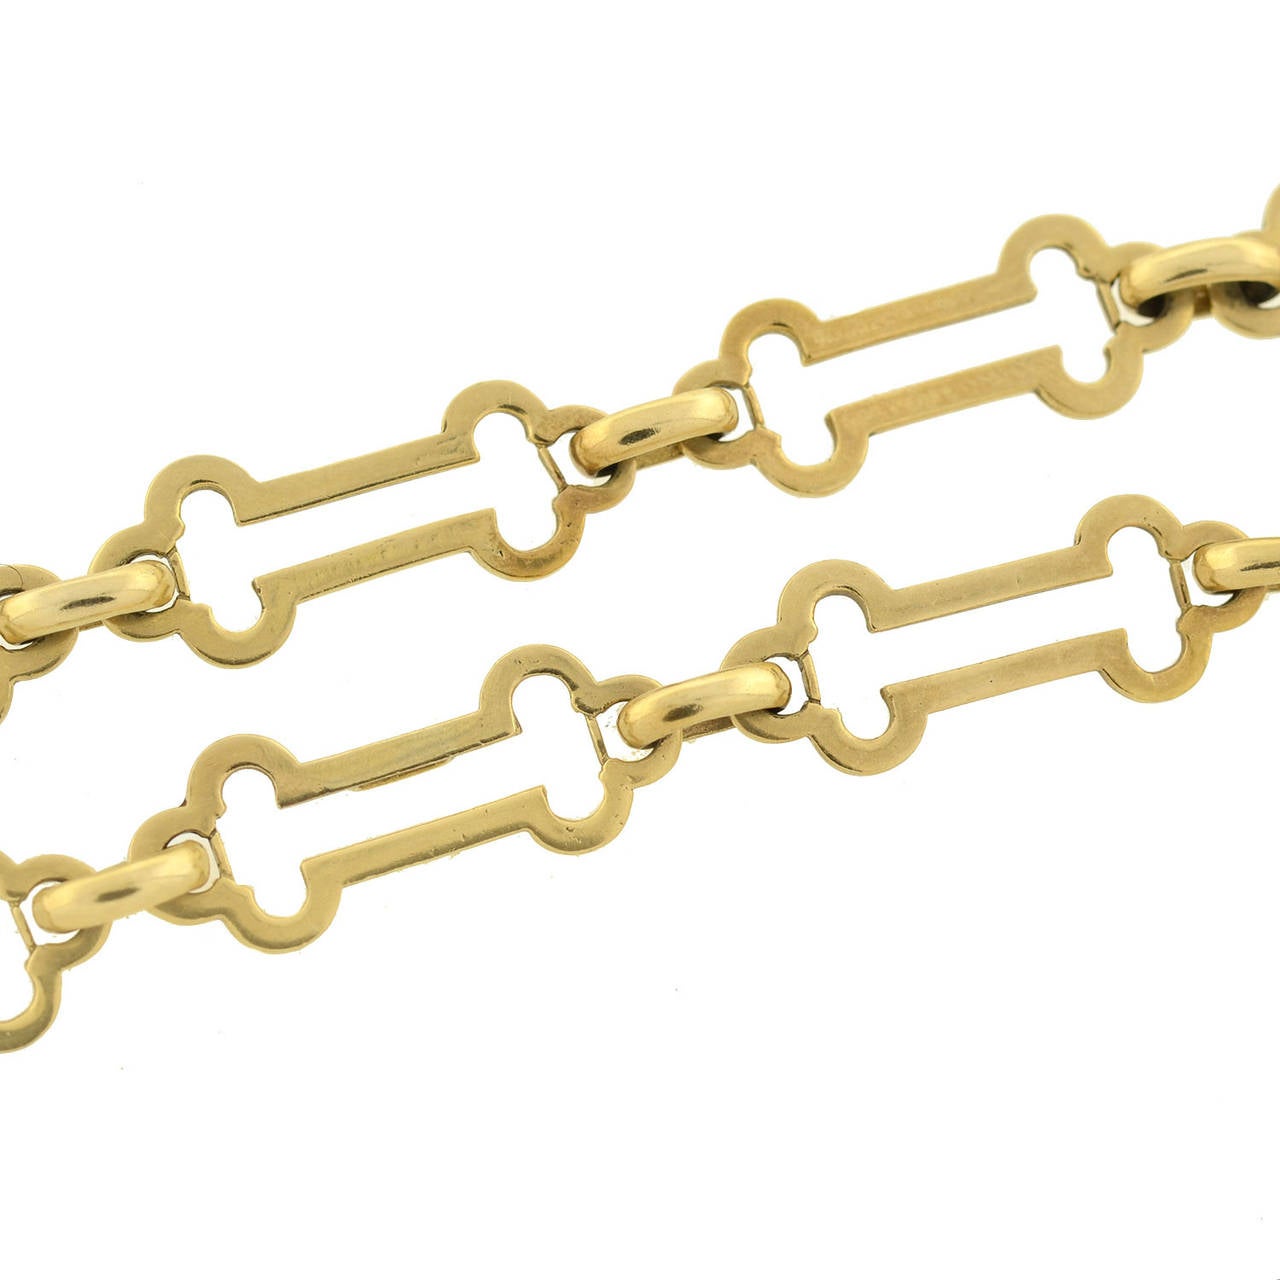 A fabulous Tiffany & Co. open link chain from the 1980's! This wonderful piece is made of 14kt yellow gold and comprised of large flat barbell shaped links that alternate with simple gold rings. The uniquely shaped links have cutout centers and the